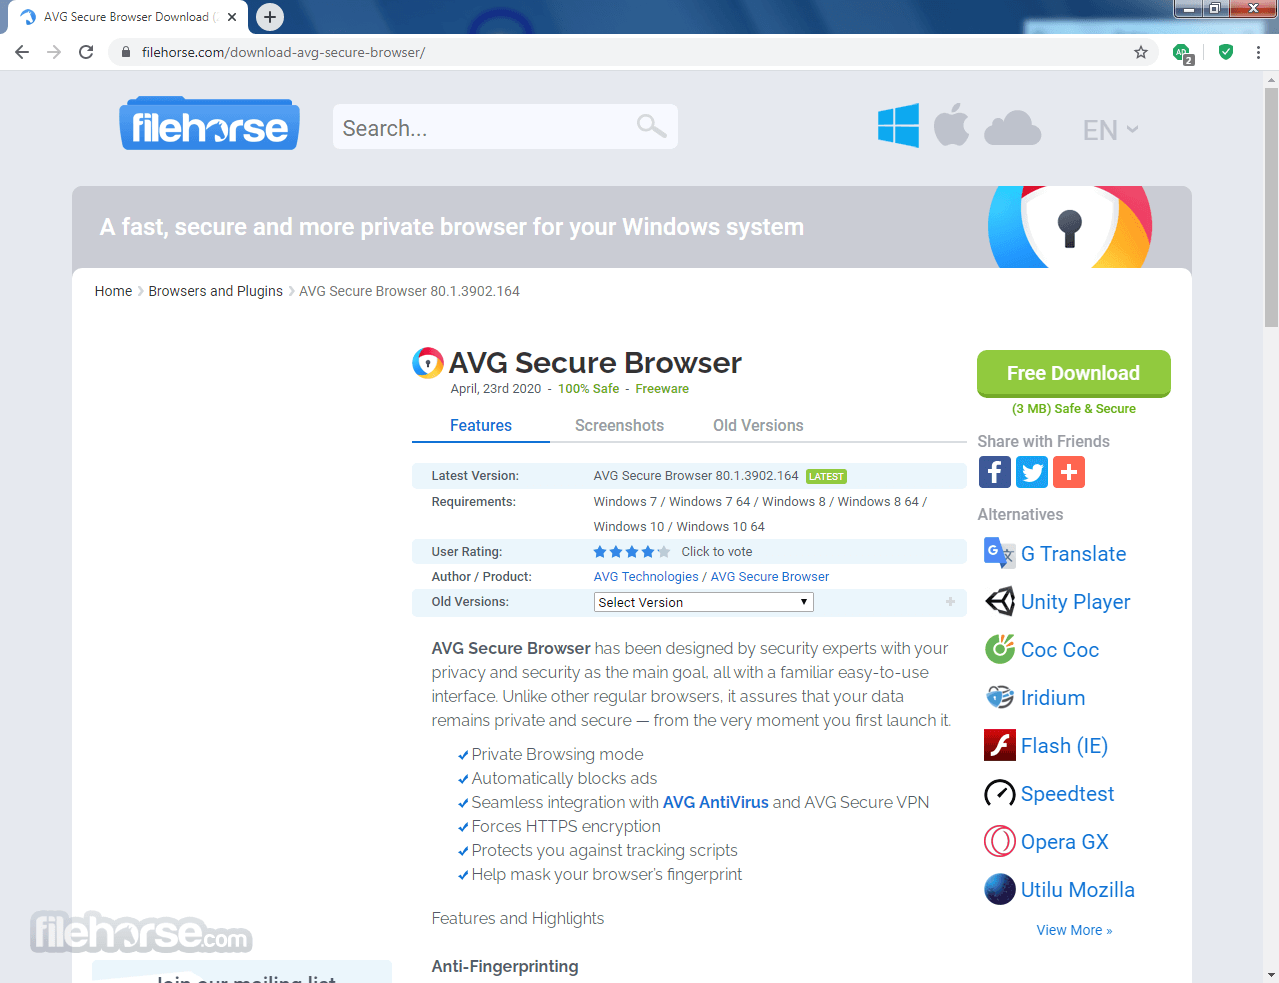 AVG Secure Browser Free Download